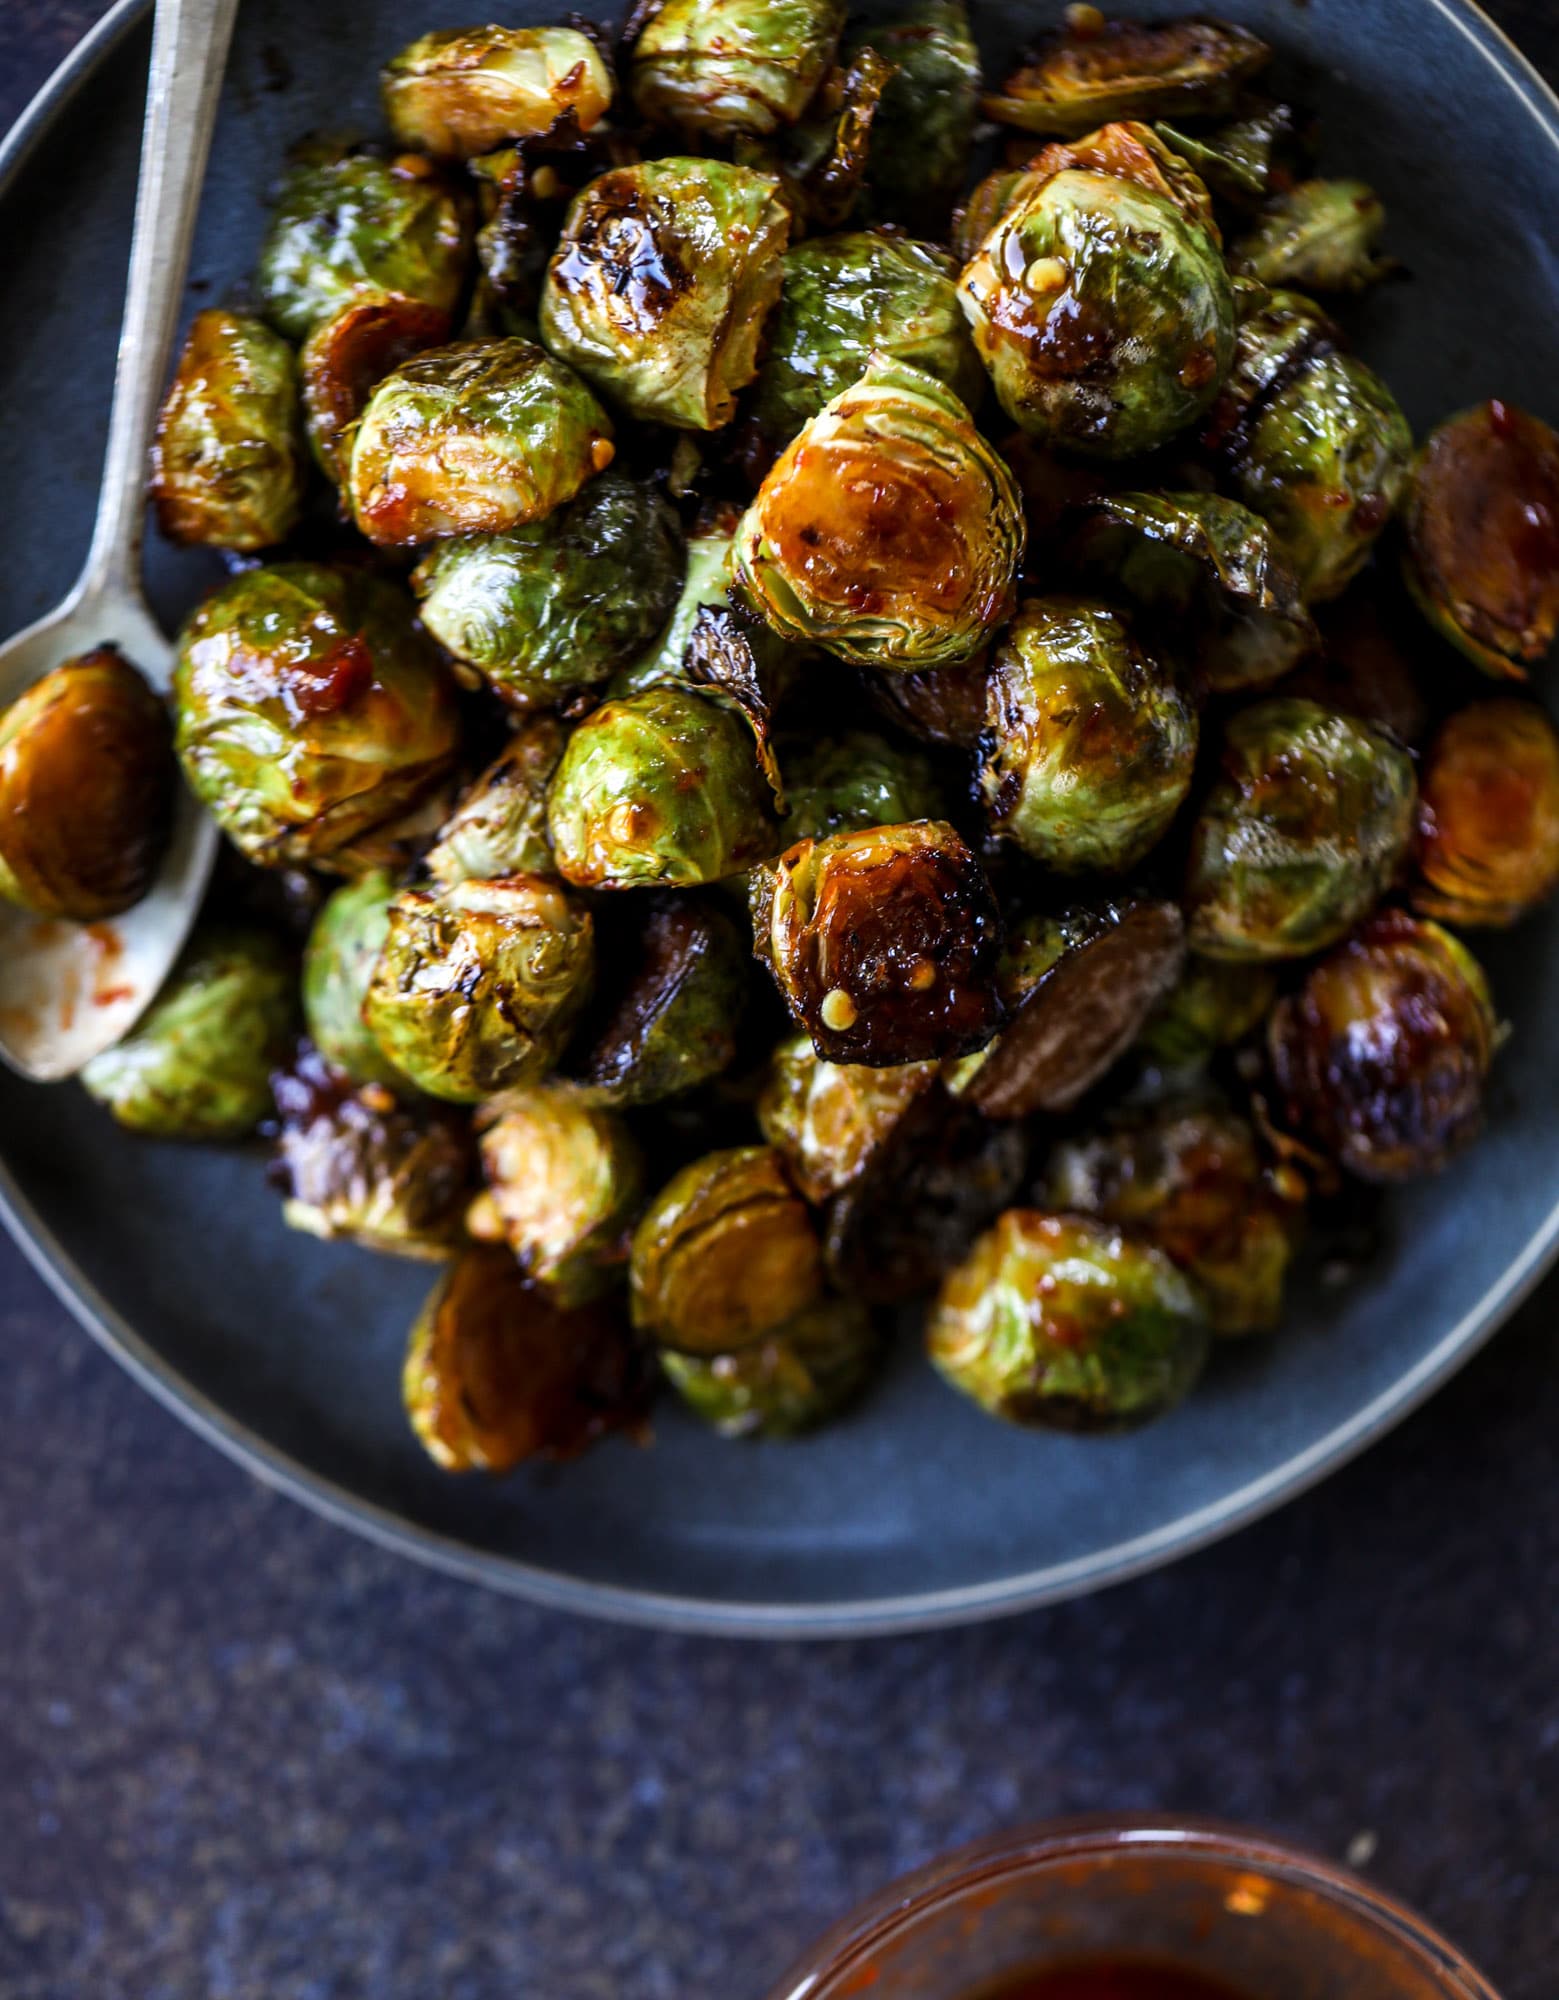 These sweet and spicy brussels sprouts are roasted to perfect and the most delicious side dish! It's a great way to elevate regular old brussels sprouts and make a fantastic side to to serve on a weeknight! I howsweeteats.com #spicy #brusselssprouts